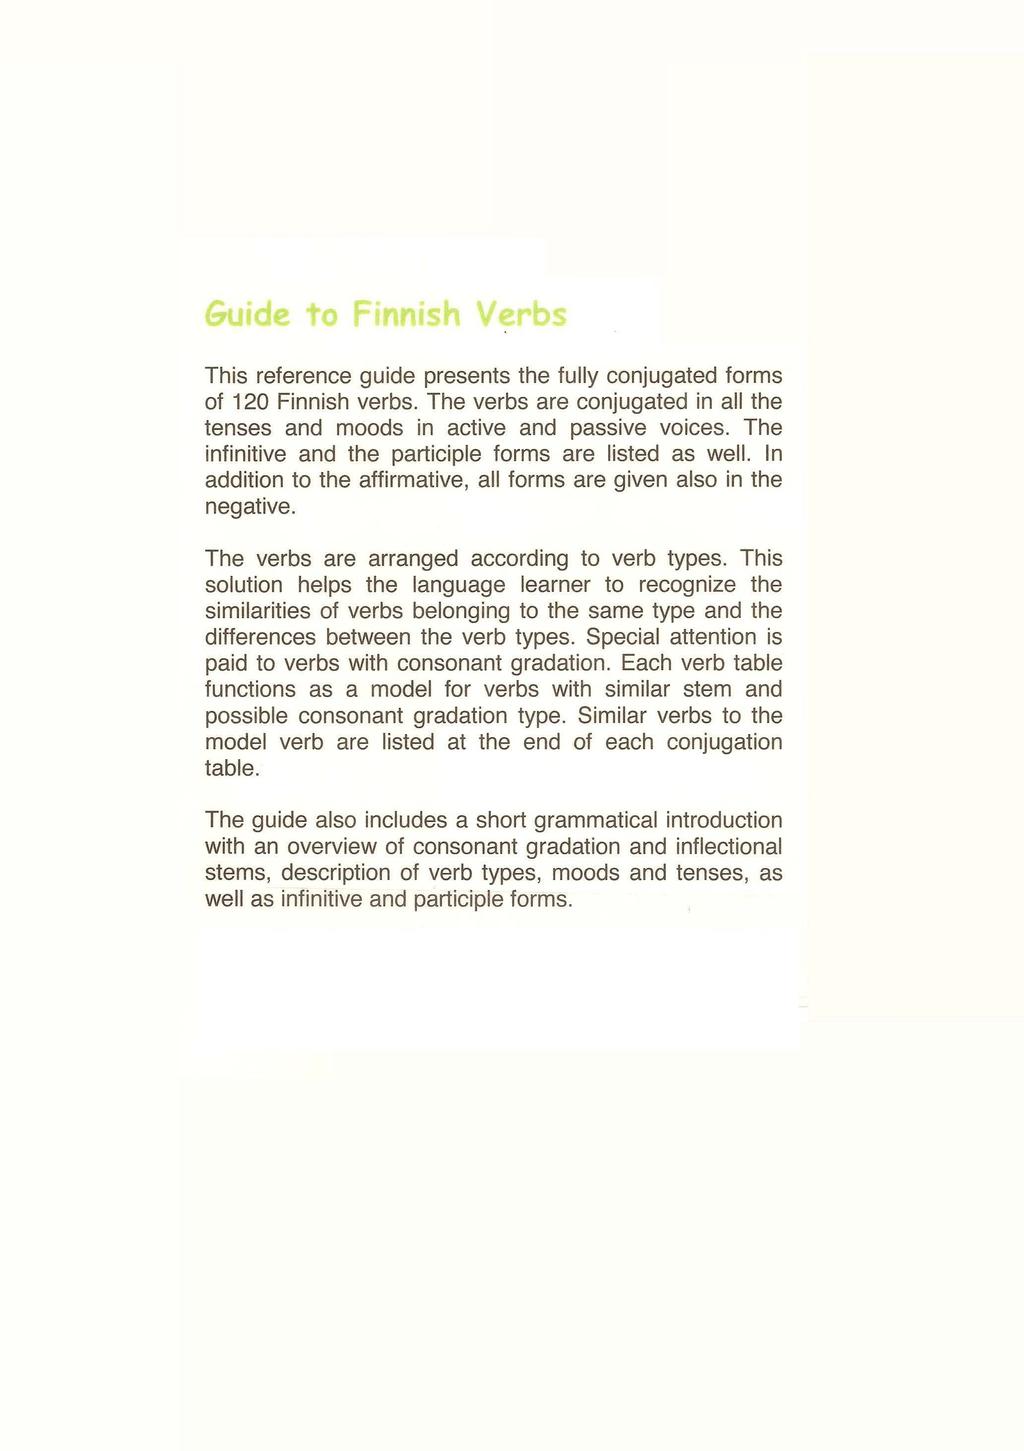 Guide to Finnish Verbs This reference guide presents the fully conjugated forms of 120 Finnish verbs. The verbs are conjugated in all the tenses and moods in active and passive voices.